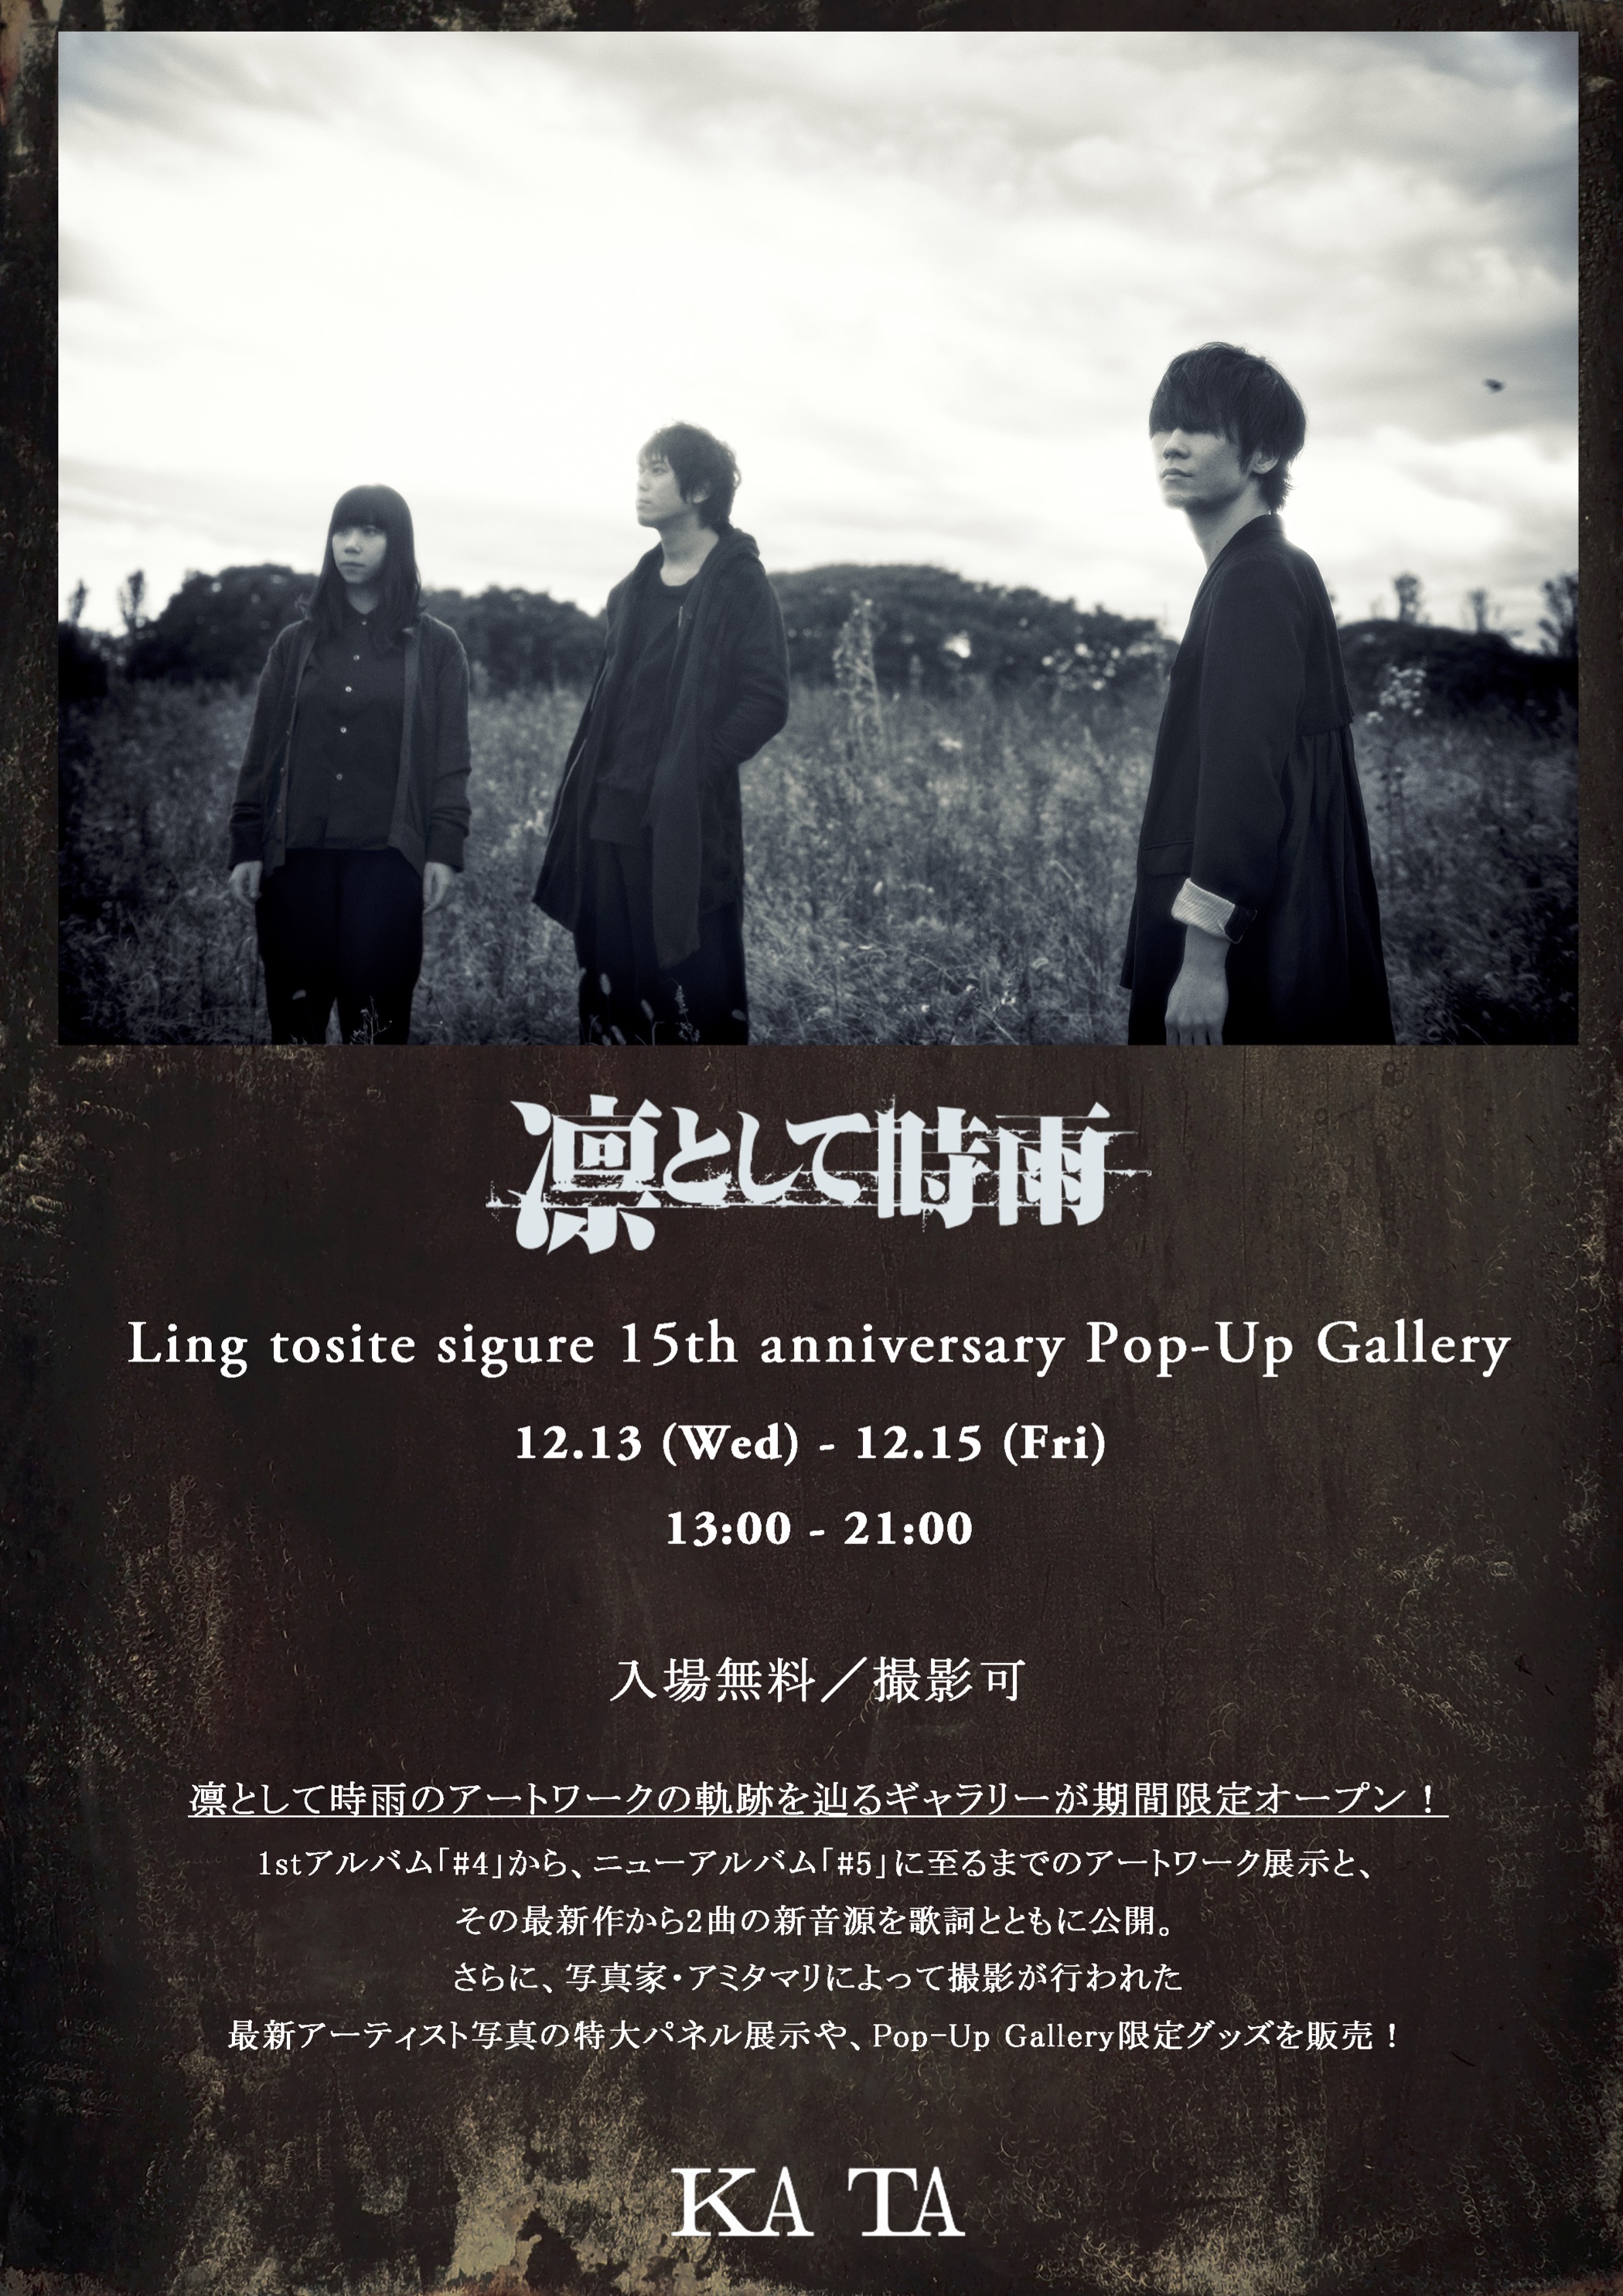 Ling tosite sigure 15th anniversary Pop-Up Gallery